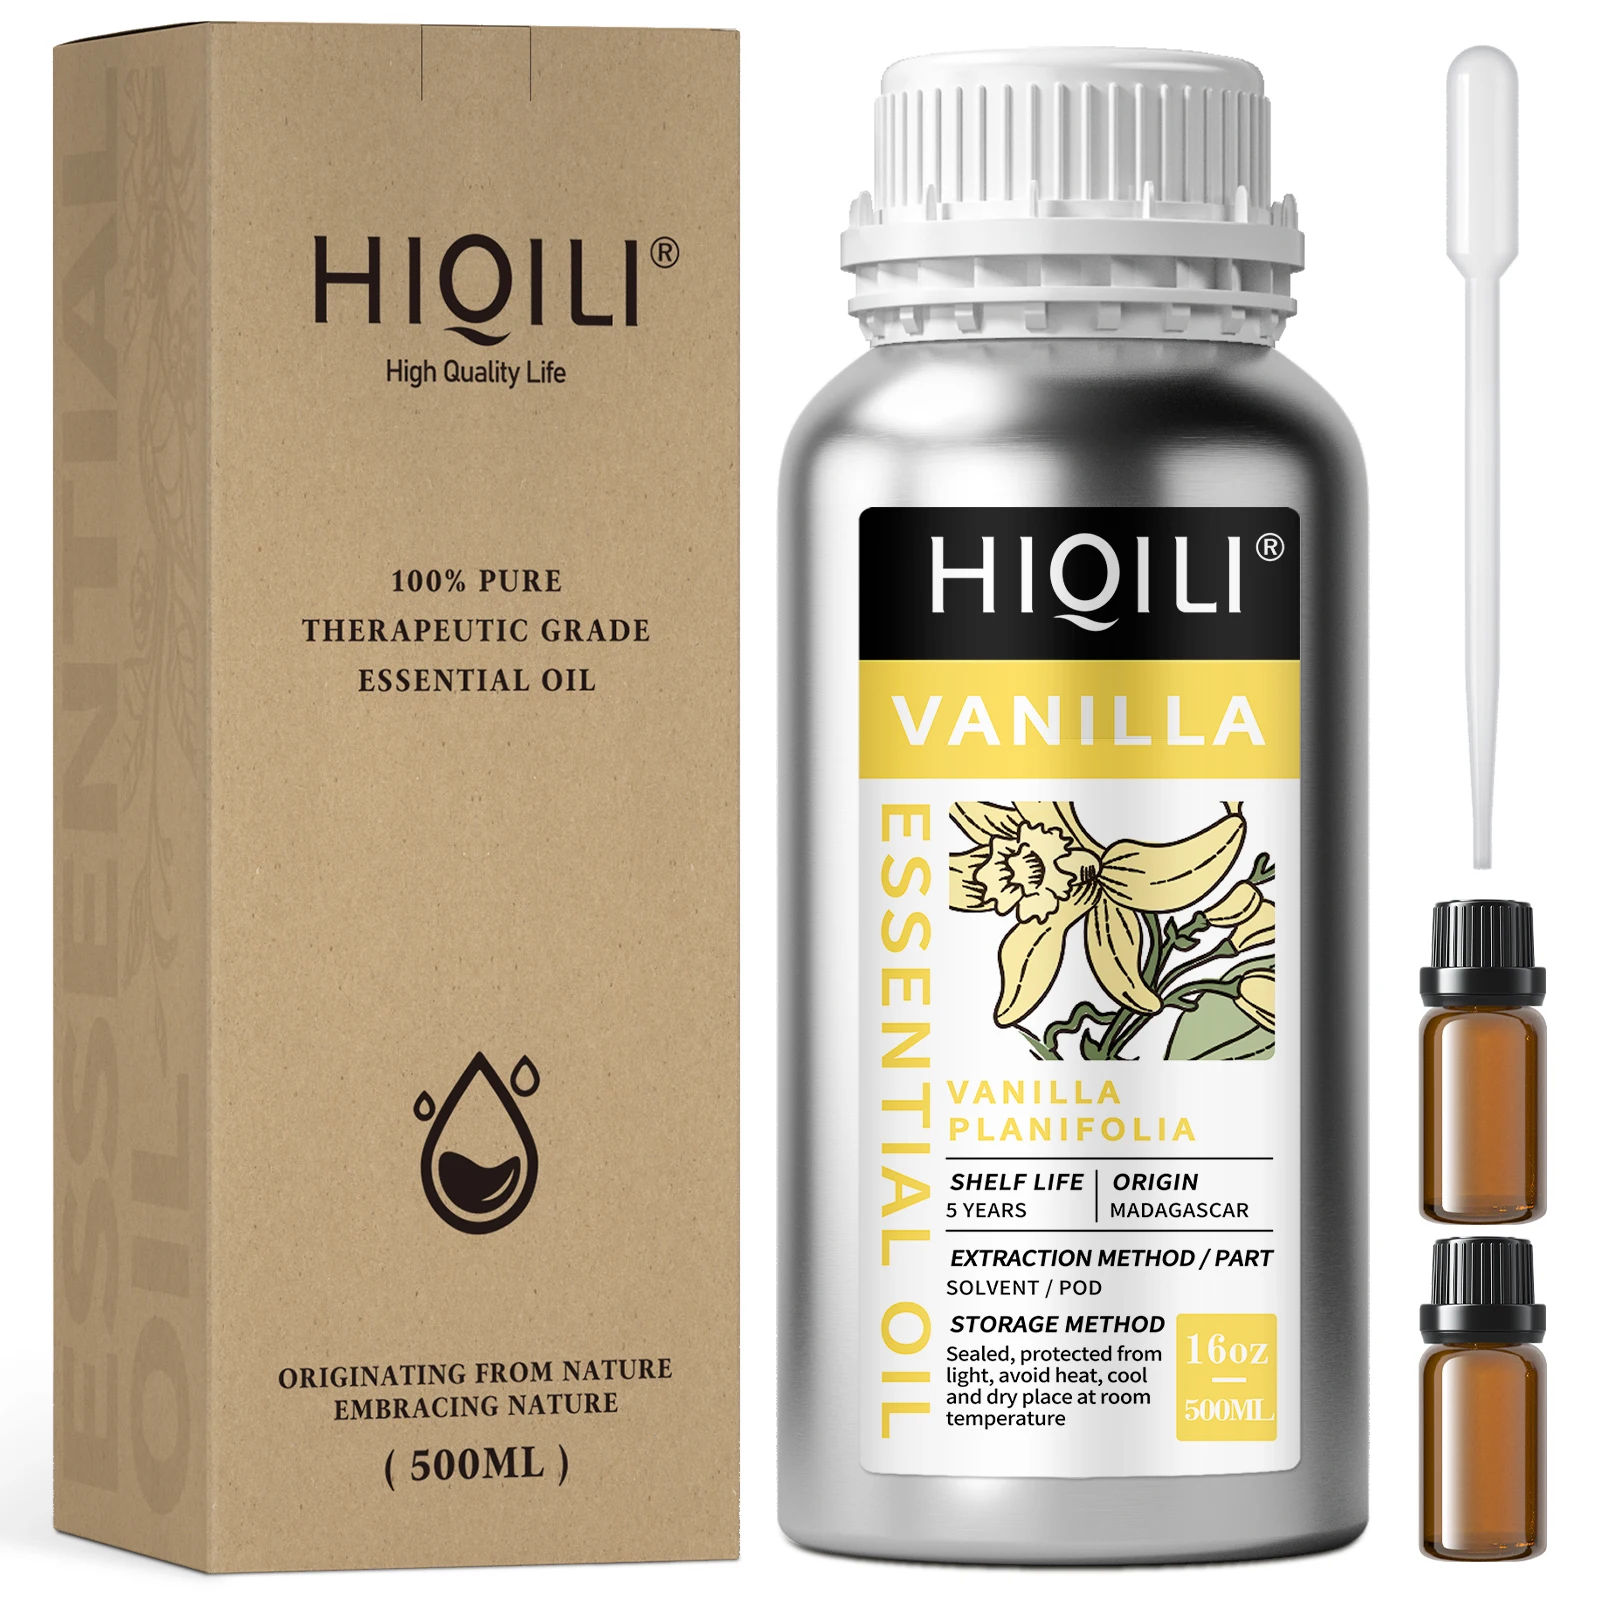 HIQILI 500ML Vanilla Essential Oils,100% Pure Nature for Aromatherapy | Used for Diffuser, Humidifier, Massage | Perfume DIY